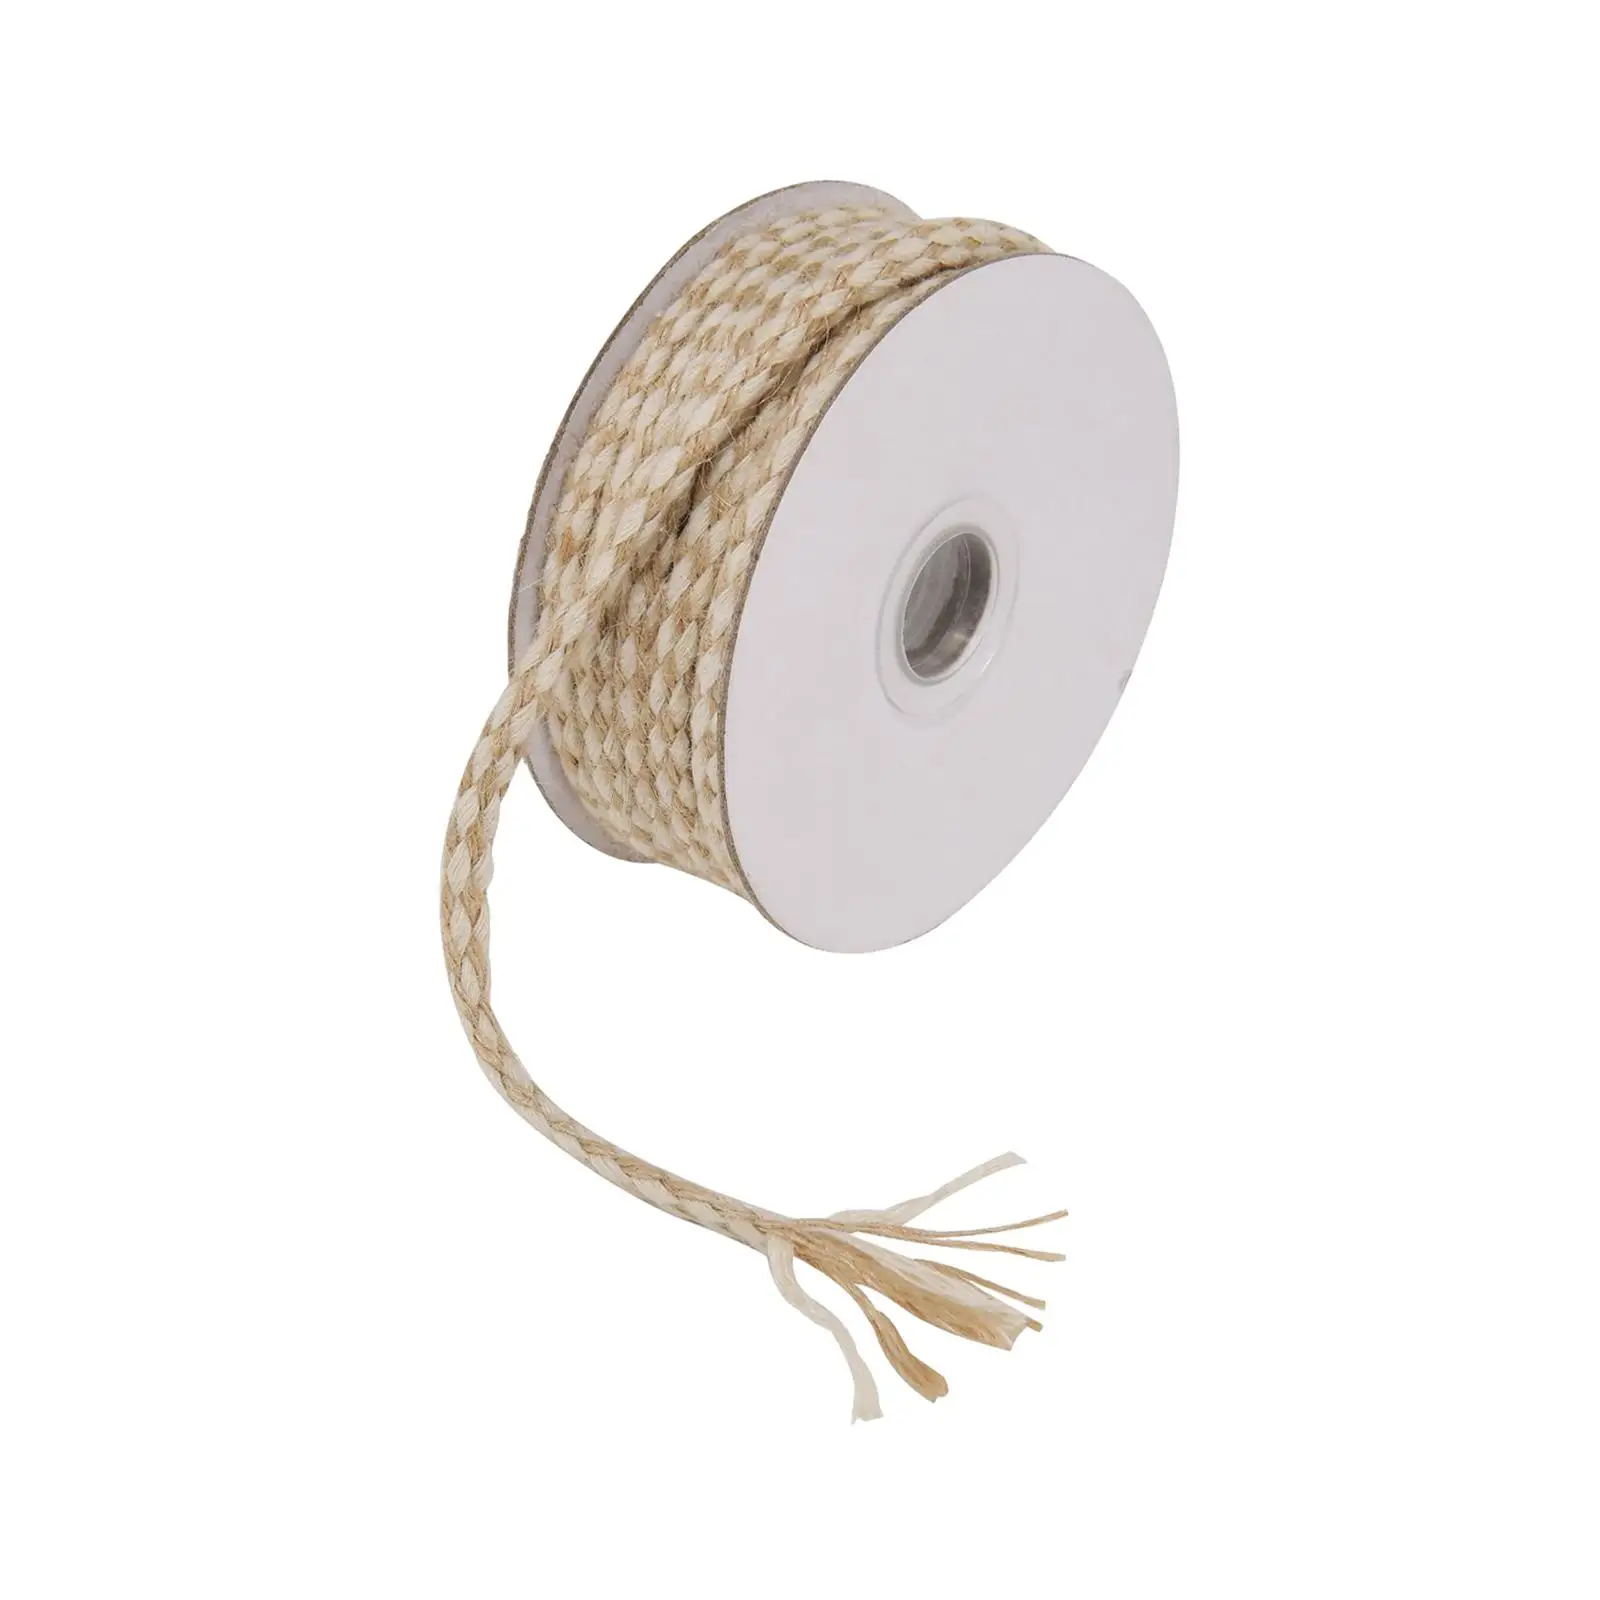 Christmas Jute String Gift Wrapping Rope Cord 10M DIY Handcraft Twisted Cord,